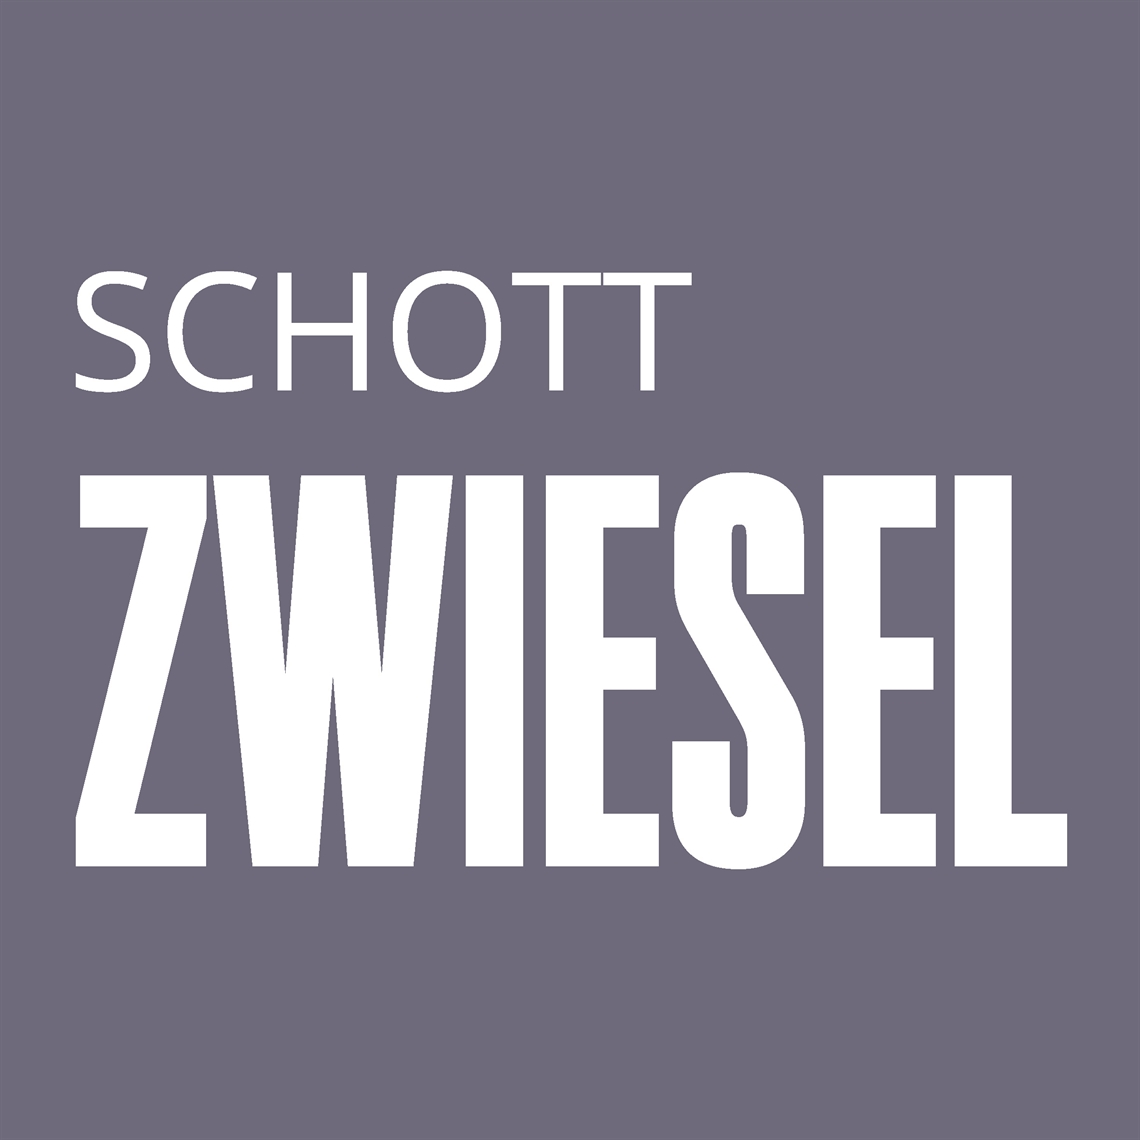 View our collection of Schott Zwiesel What makes ISO wine tasting glasses so popular?